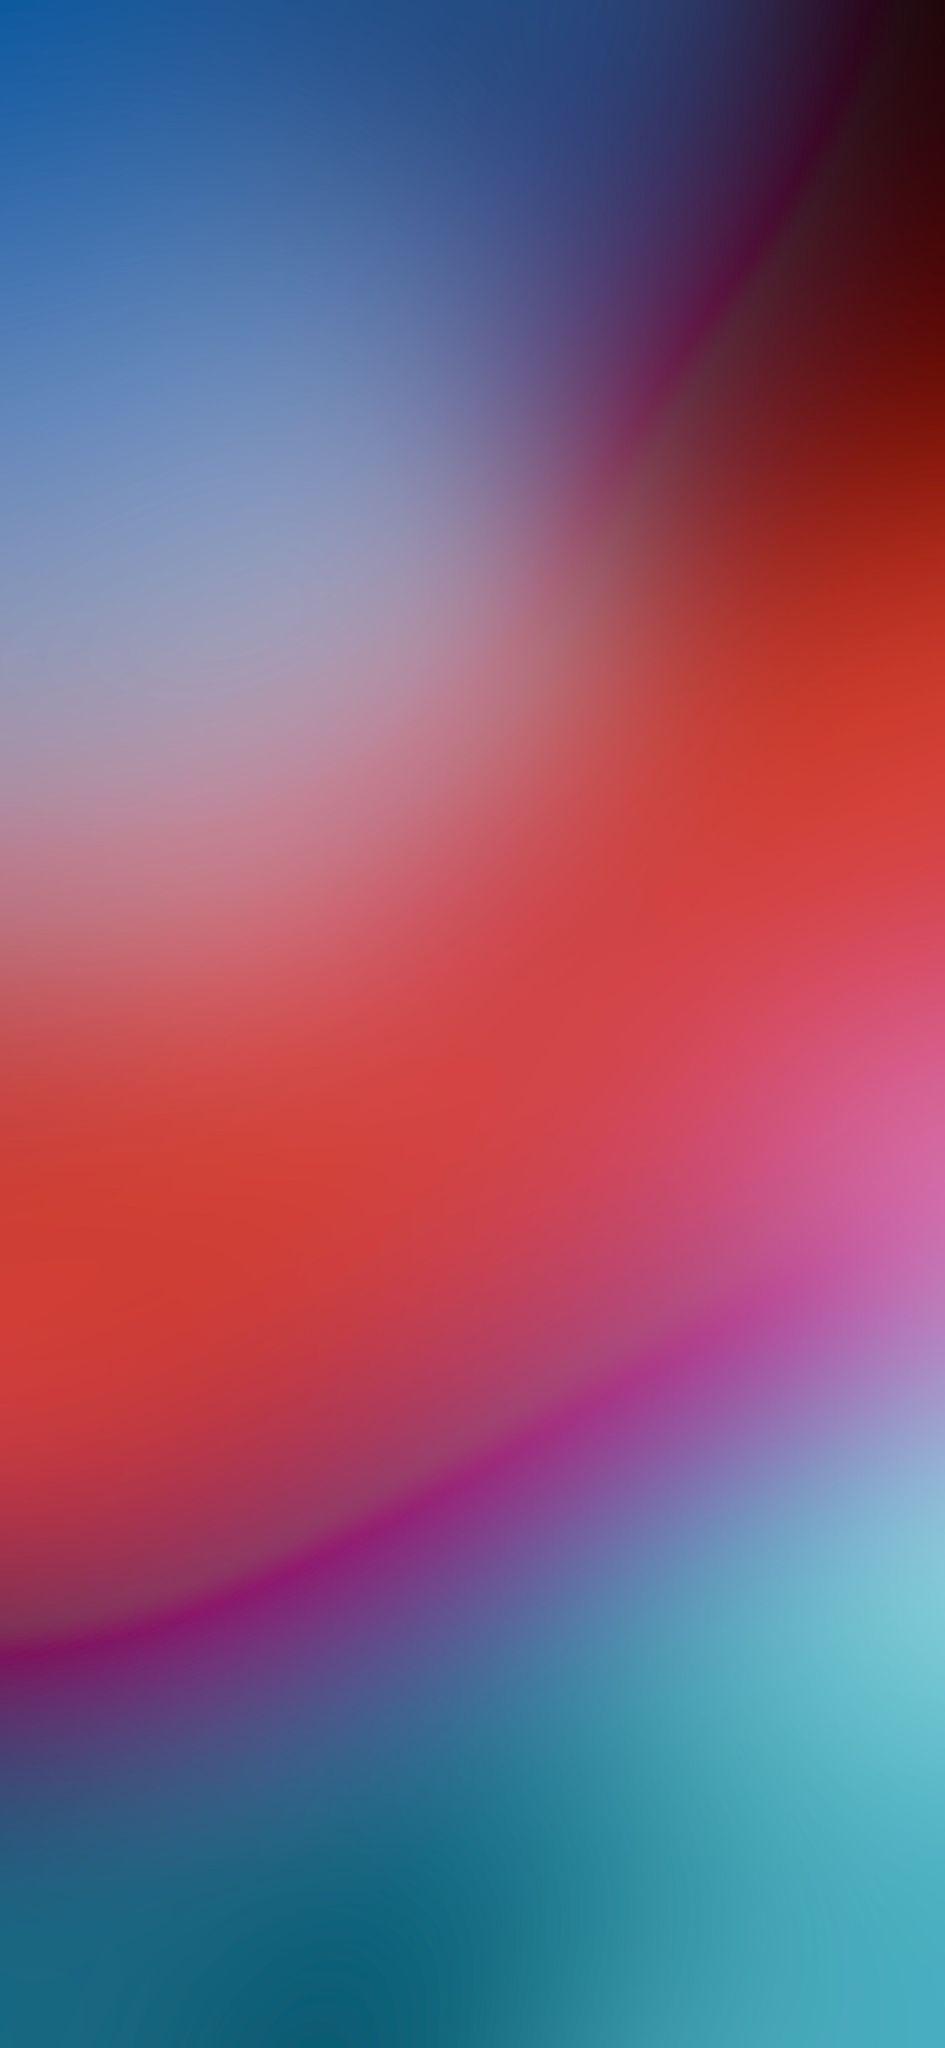 Blurry iPhone Wallpaper Free Blurry iPhone Background